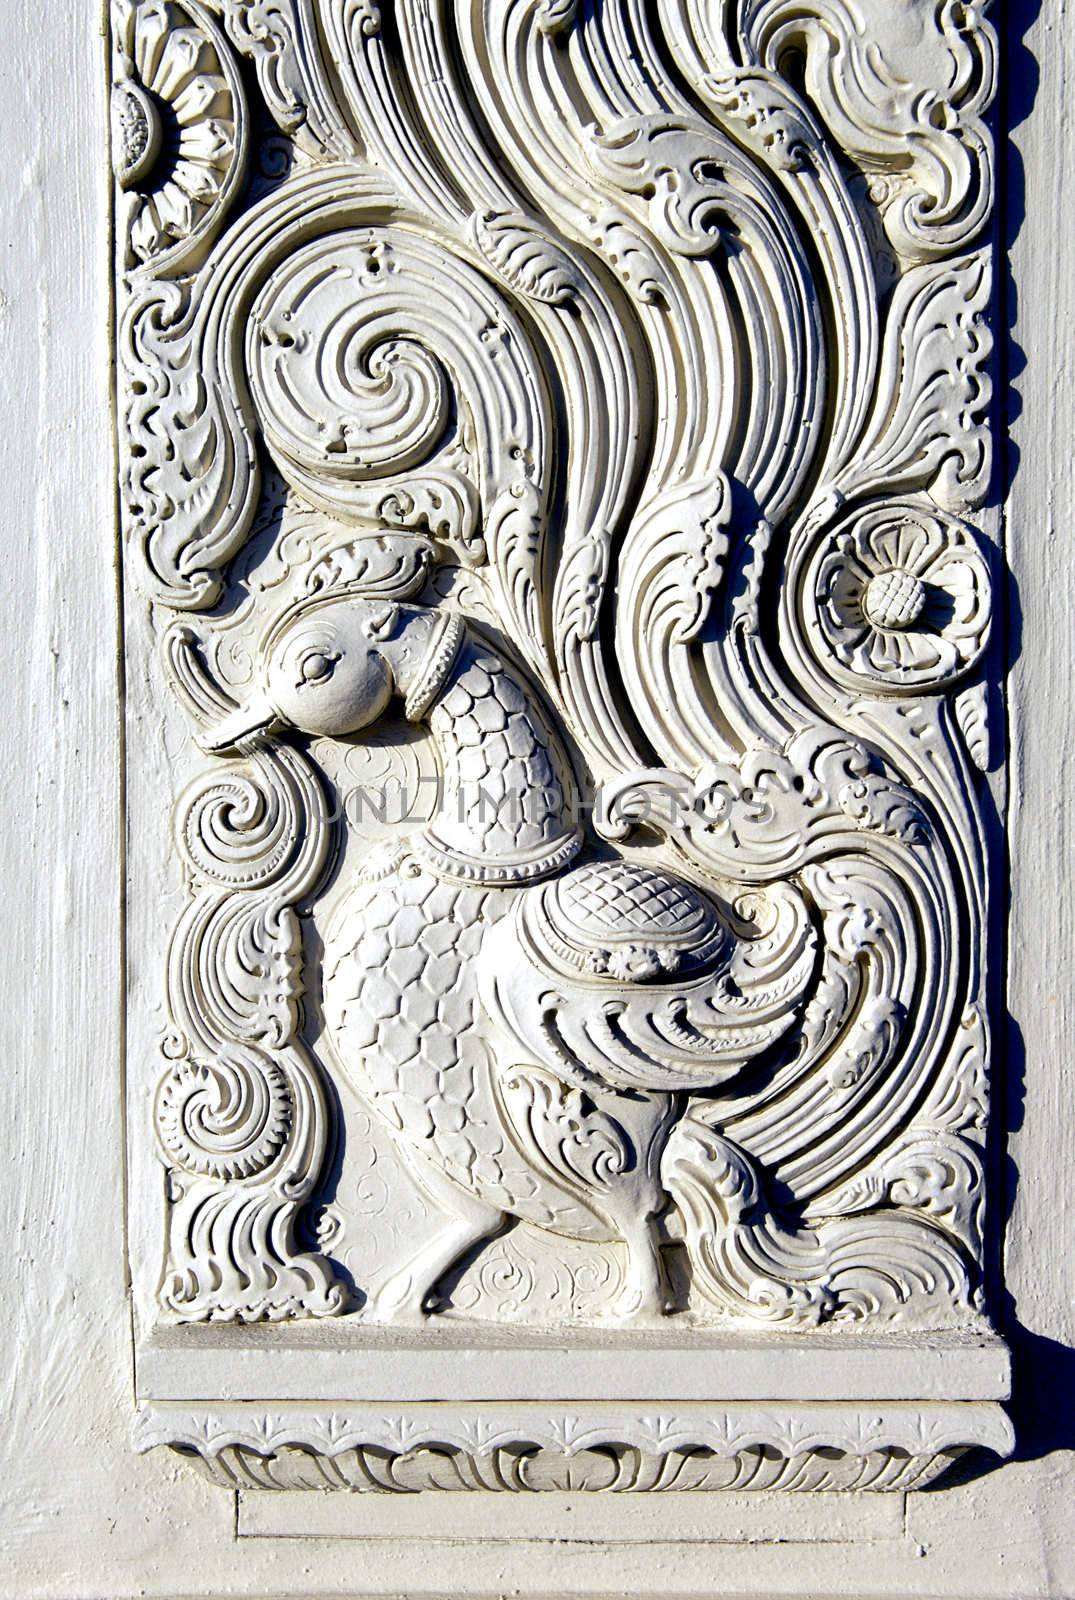 Image of a duck, carved, etched or sculpted in plaster